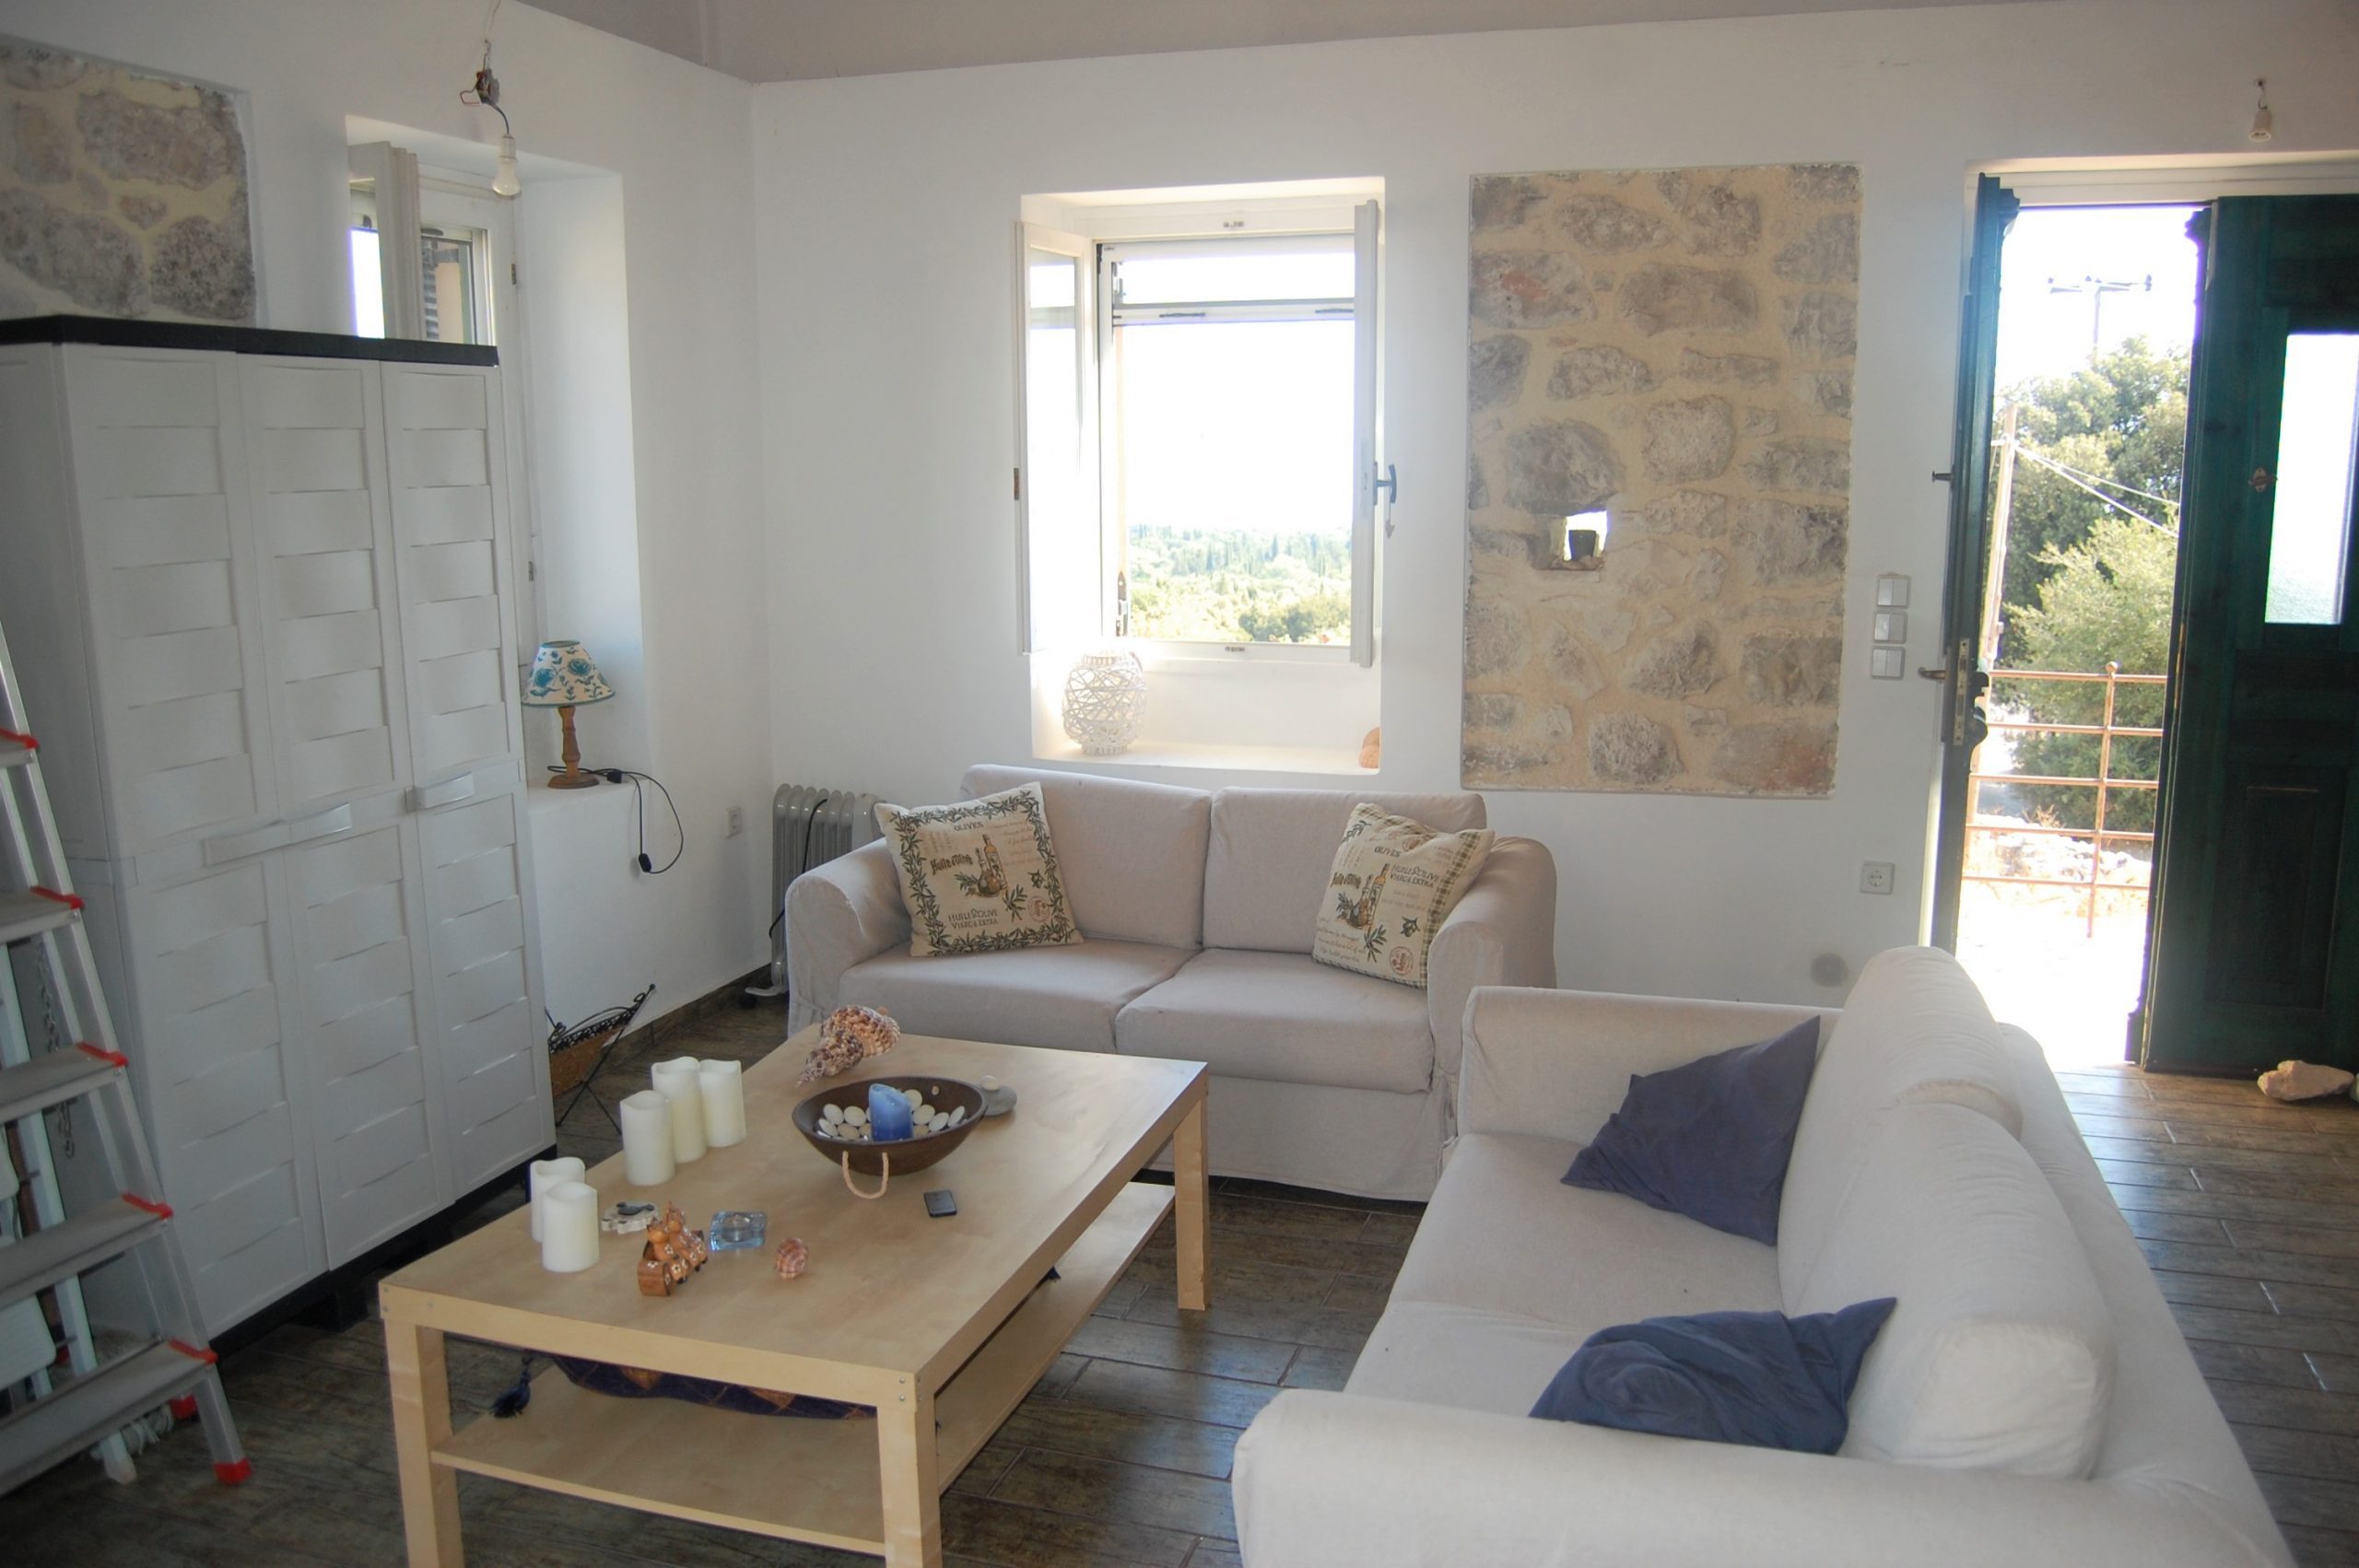 Living room area of house for sale Ithaca Greece, Anoghi